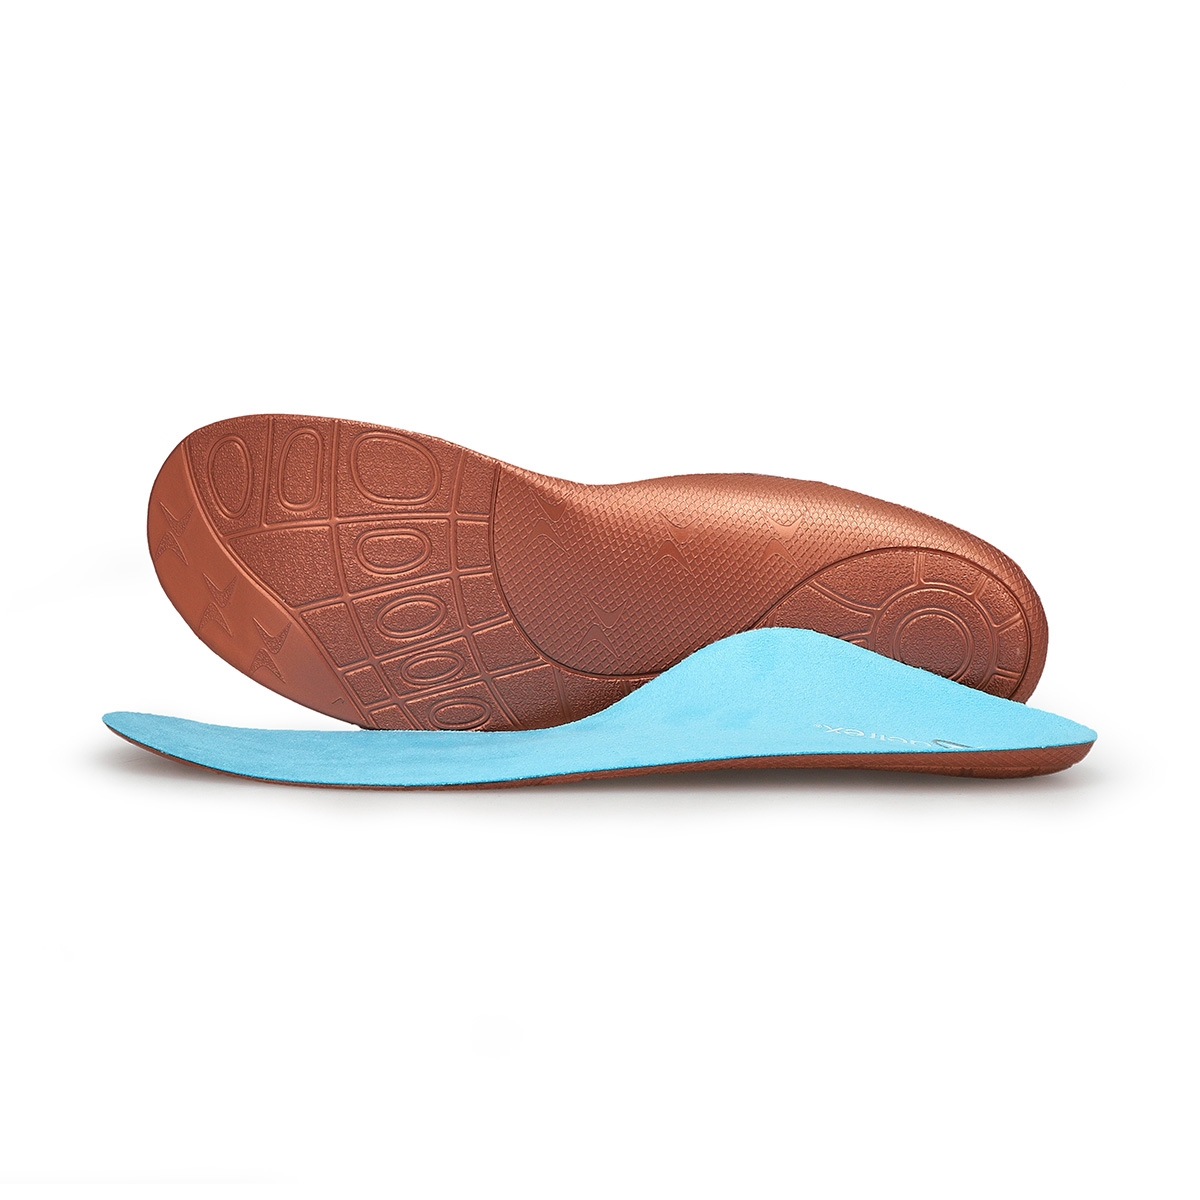 Men's L1300-M Thinsoles Cupped Orthotic Insole